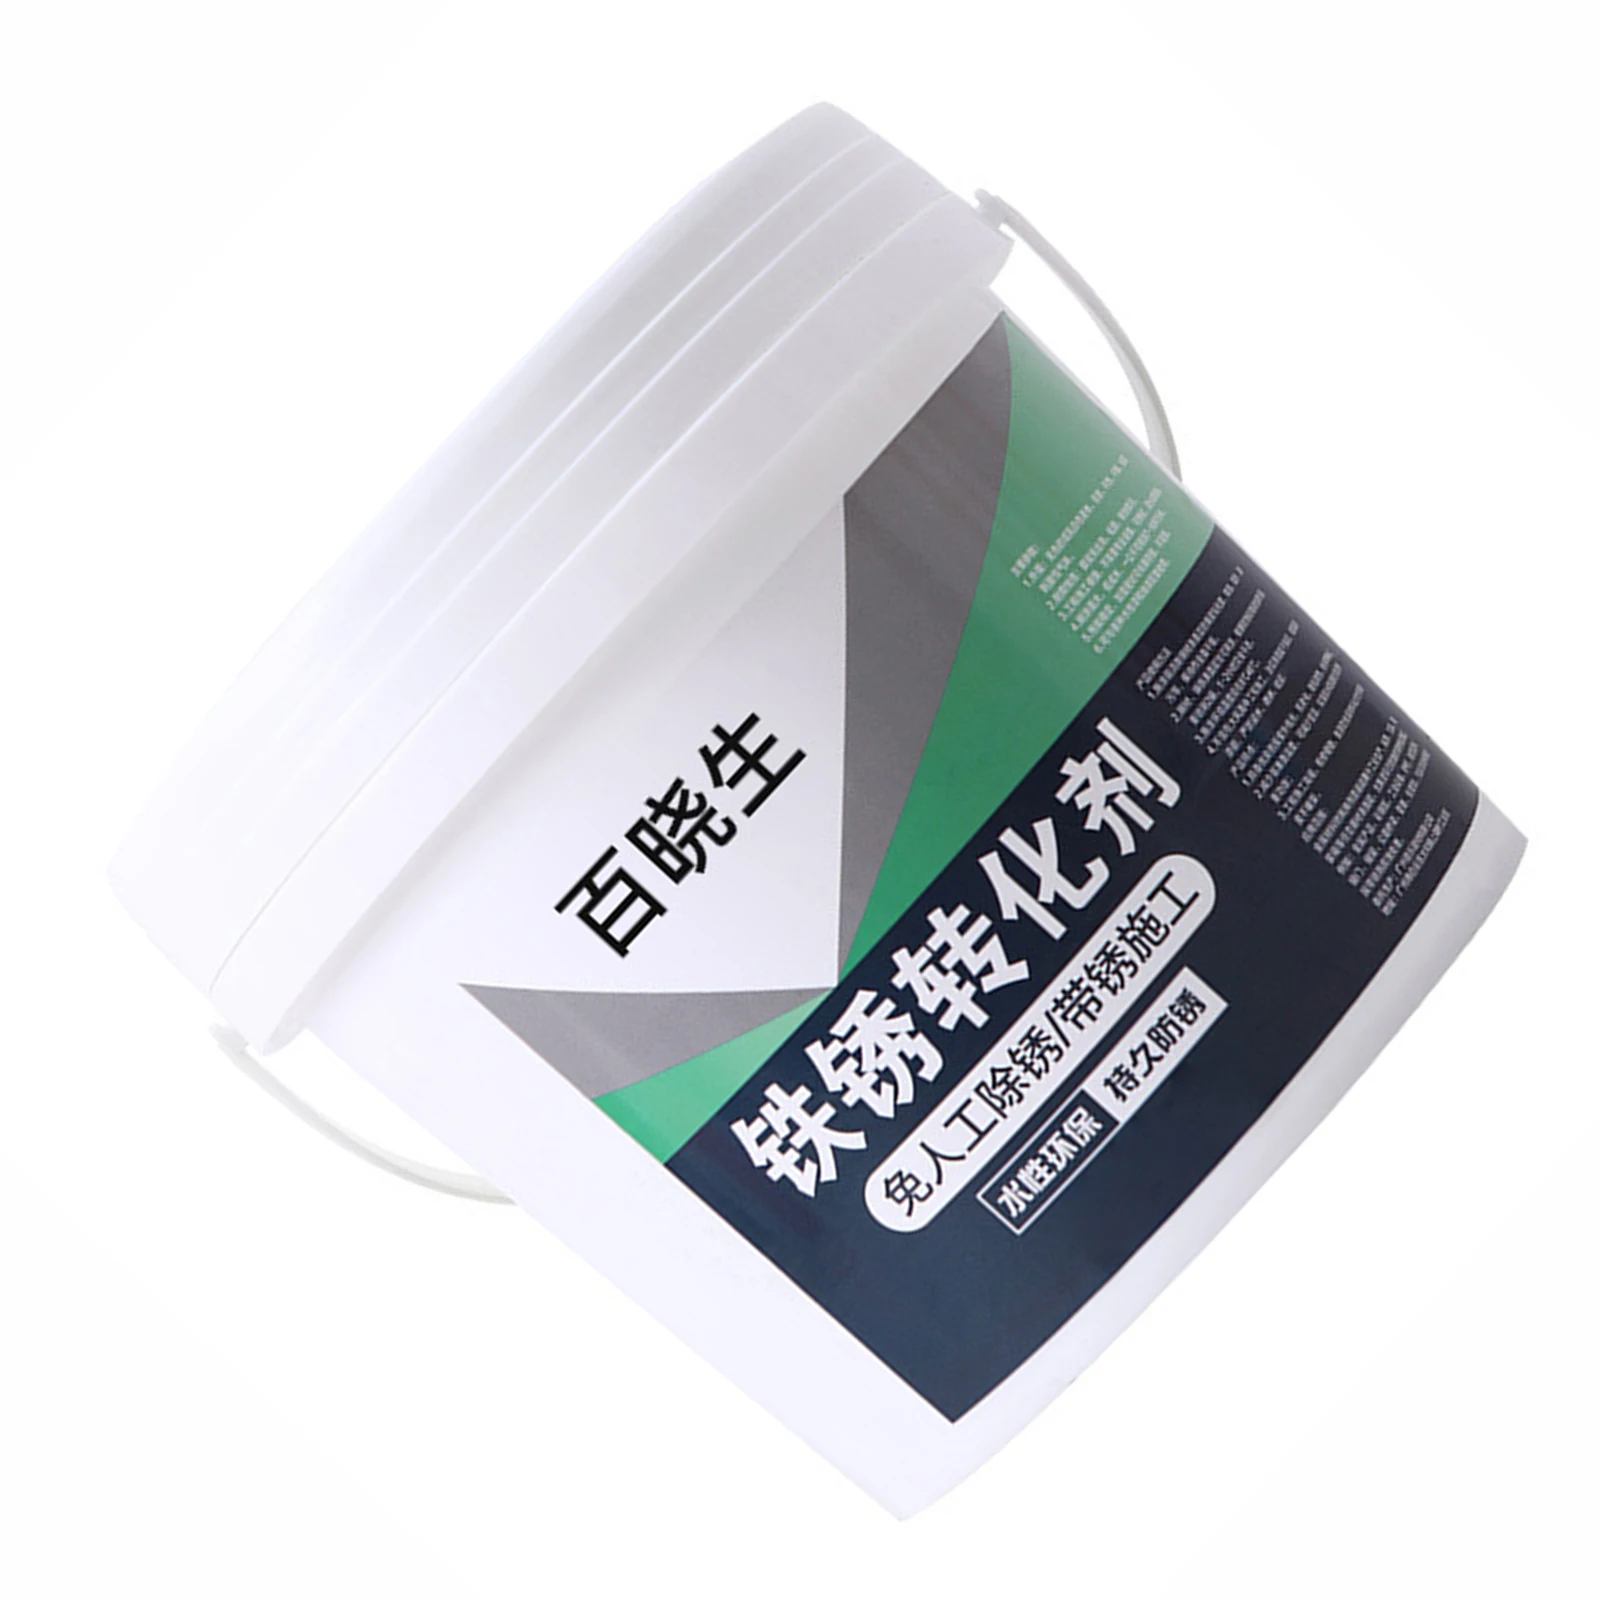 

Manual Non Toxic Rust Remover Eco-friendly Turns Rust Into Paint Rust Remover for Cast Iron Pipes Engines Iron Stairs